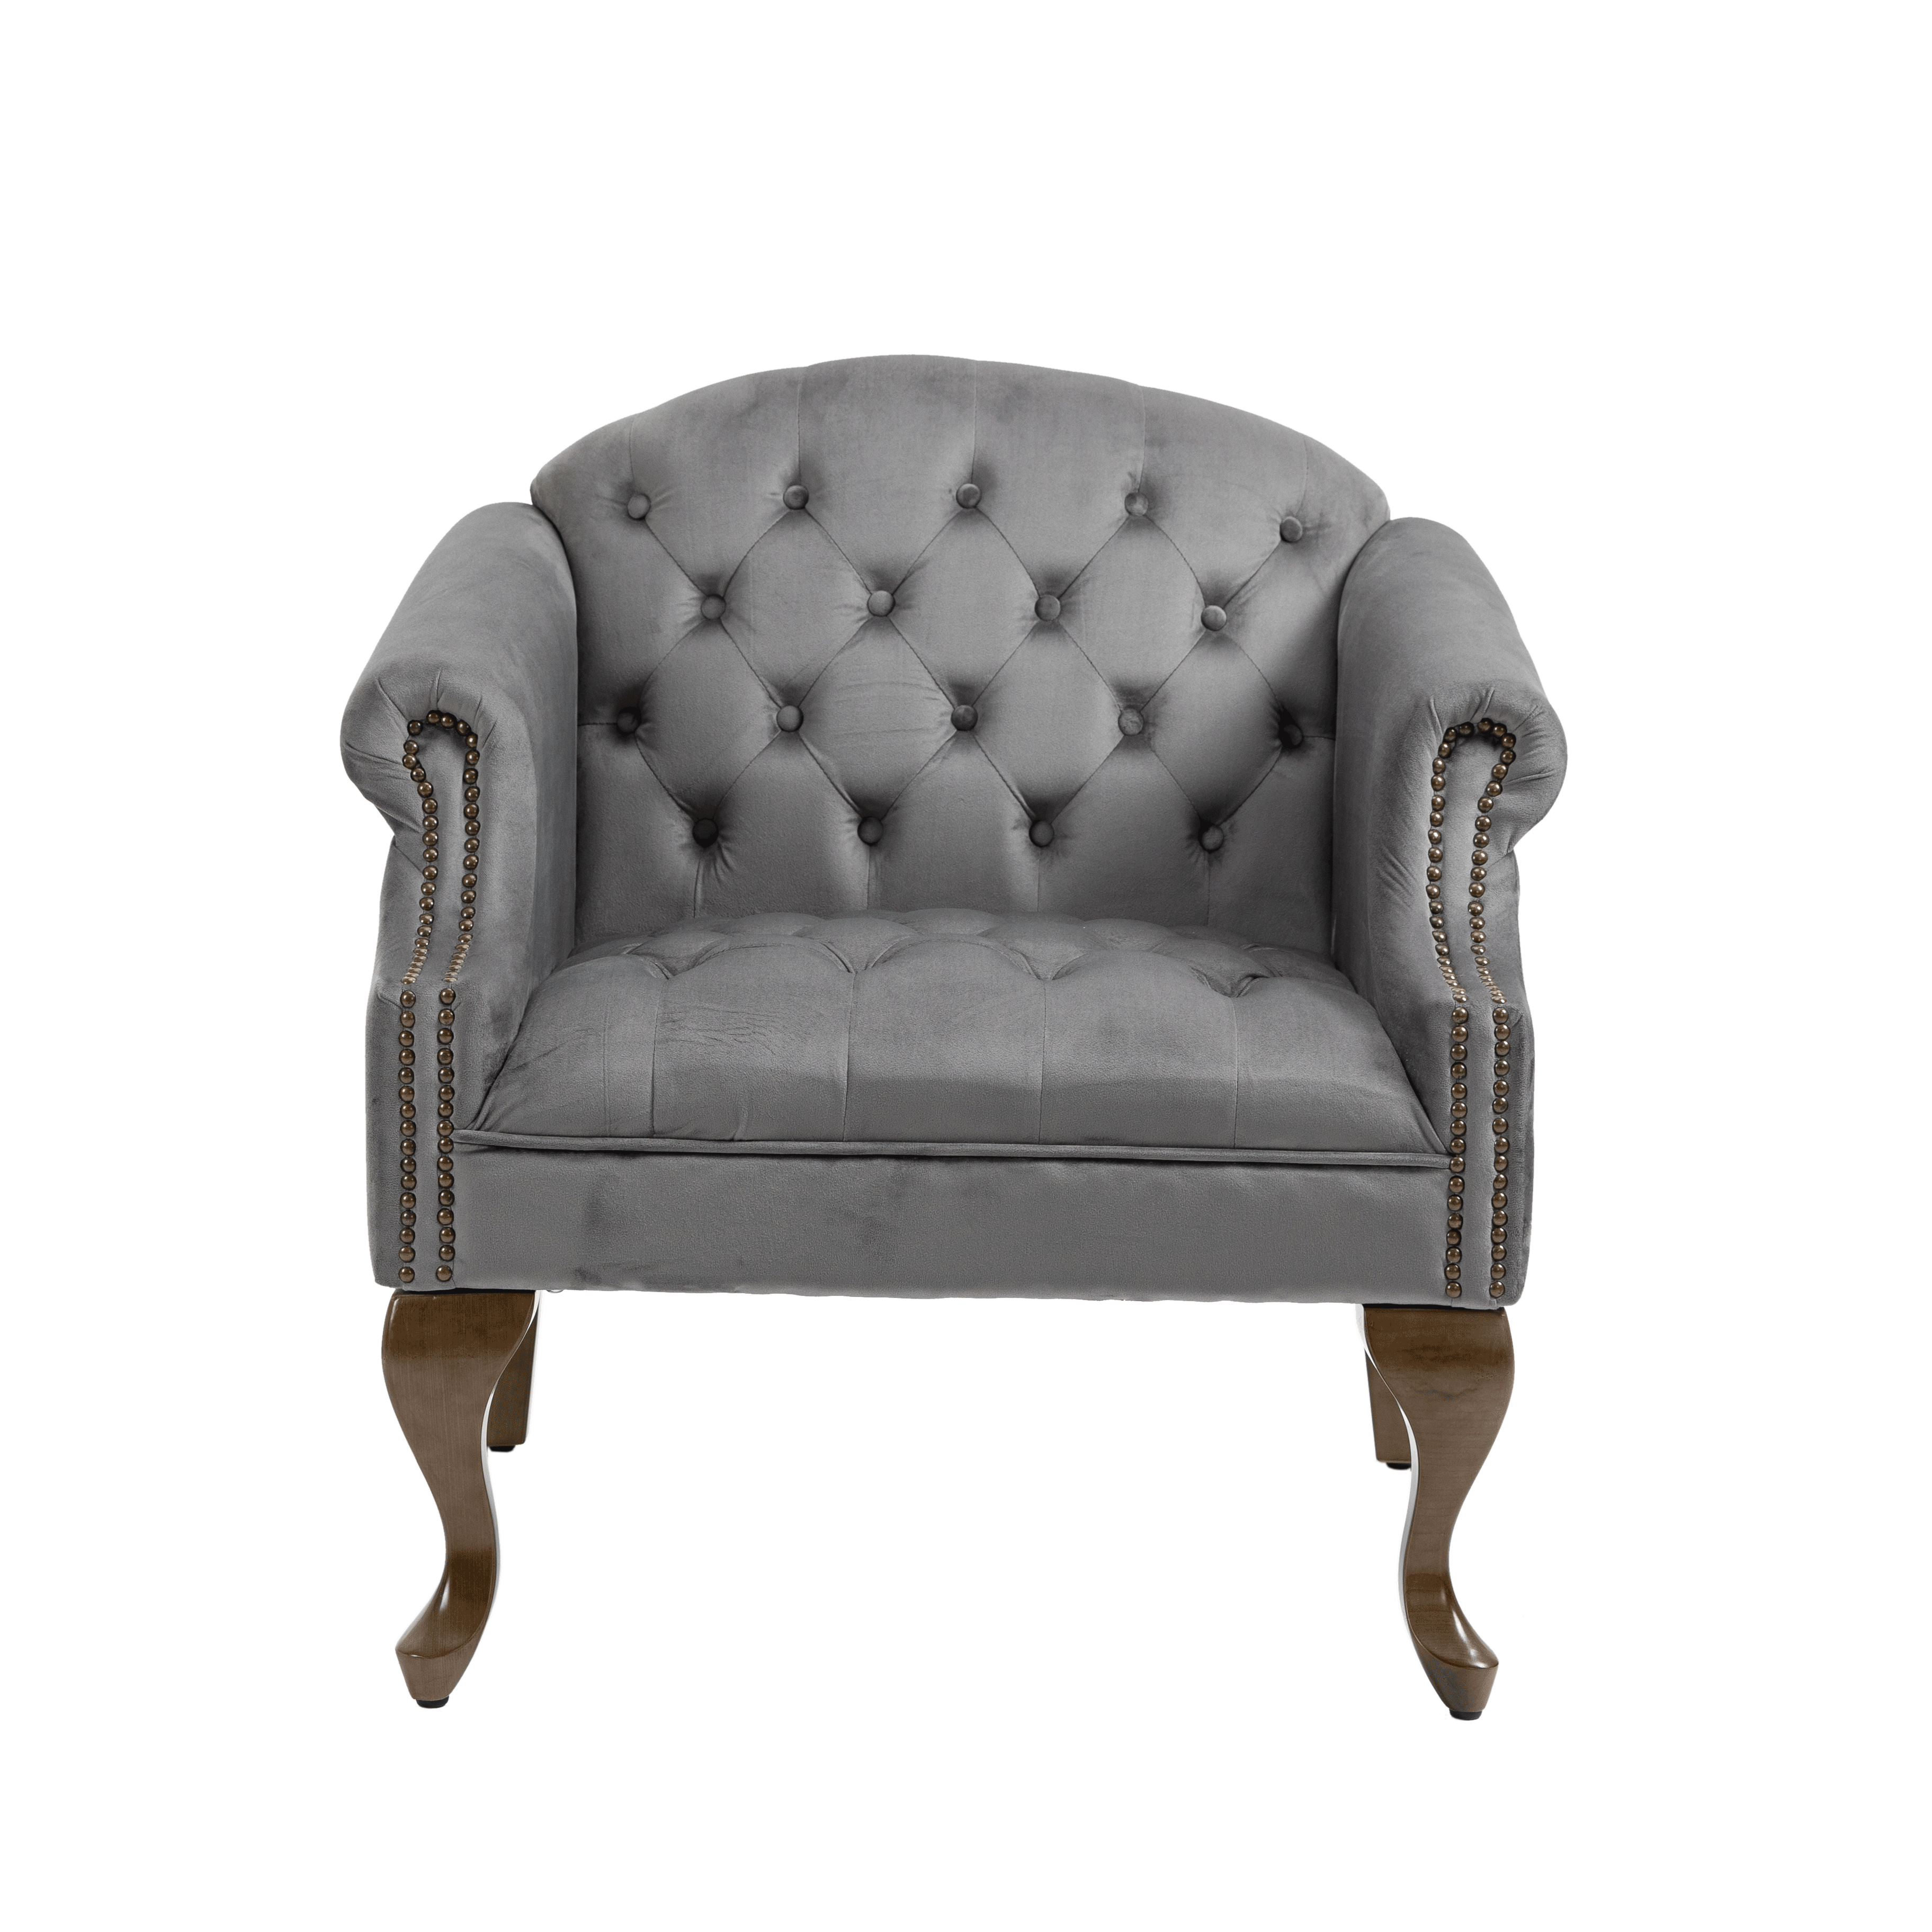 ZNTS Upholstered Accent Chair for Bedroom Living Room Chairs Lounge Chair  with Wood Legs Gray Velvet W133364233